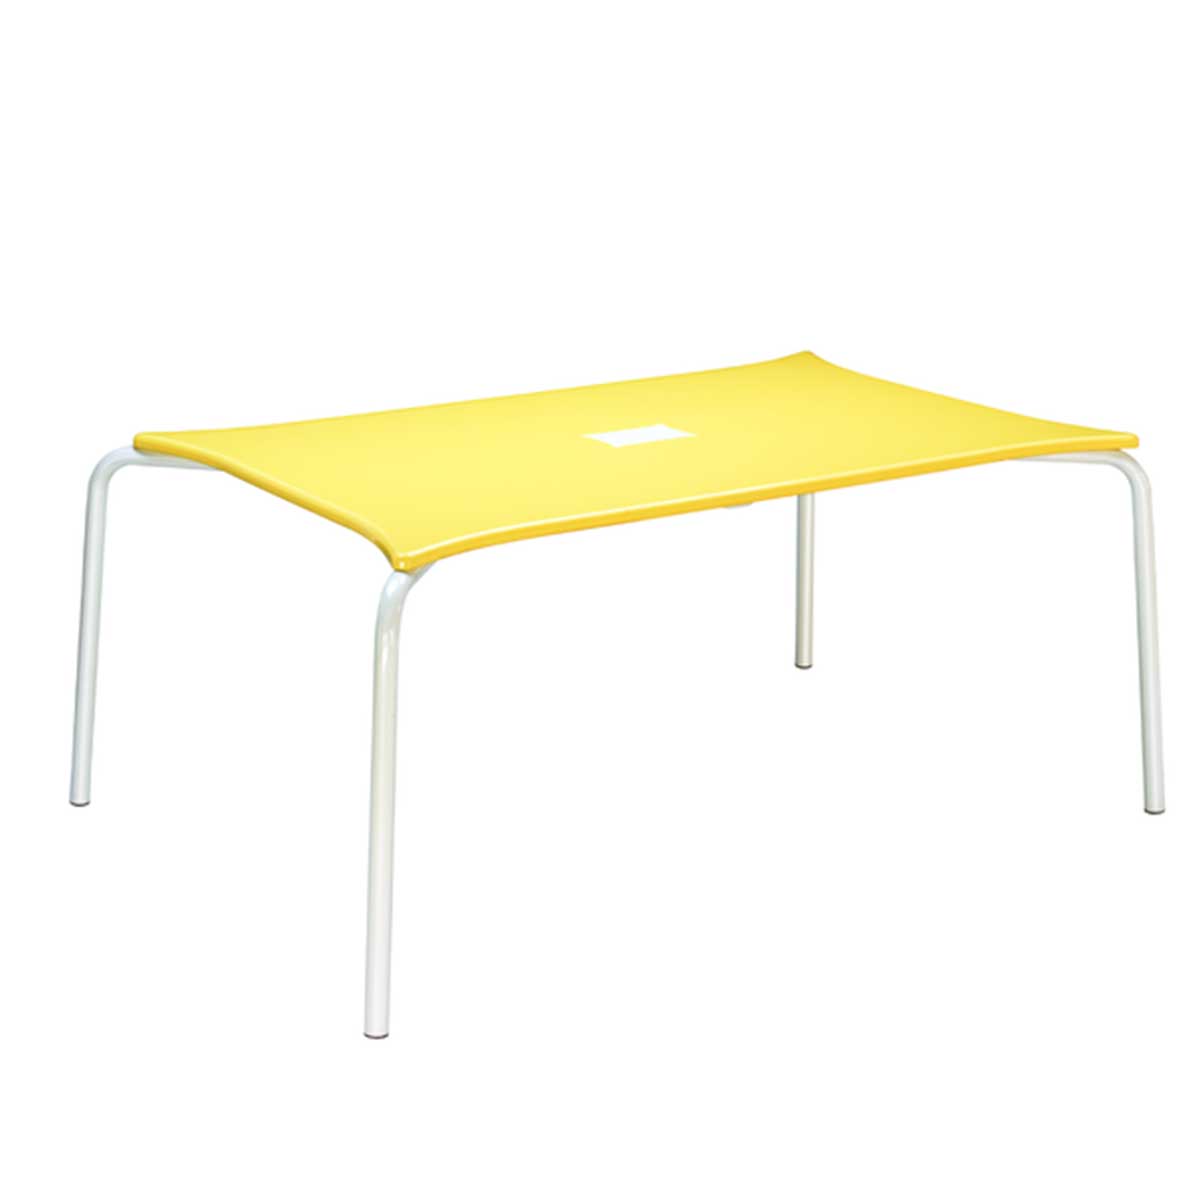 Cafeteria Table Manufacturers, Suppliers, Exporters in Delhi 